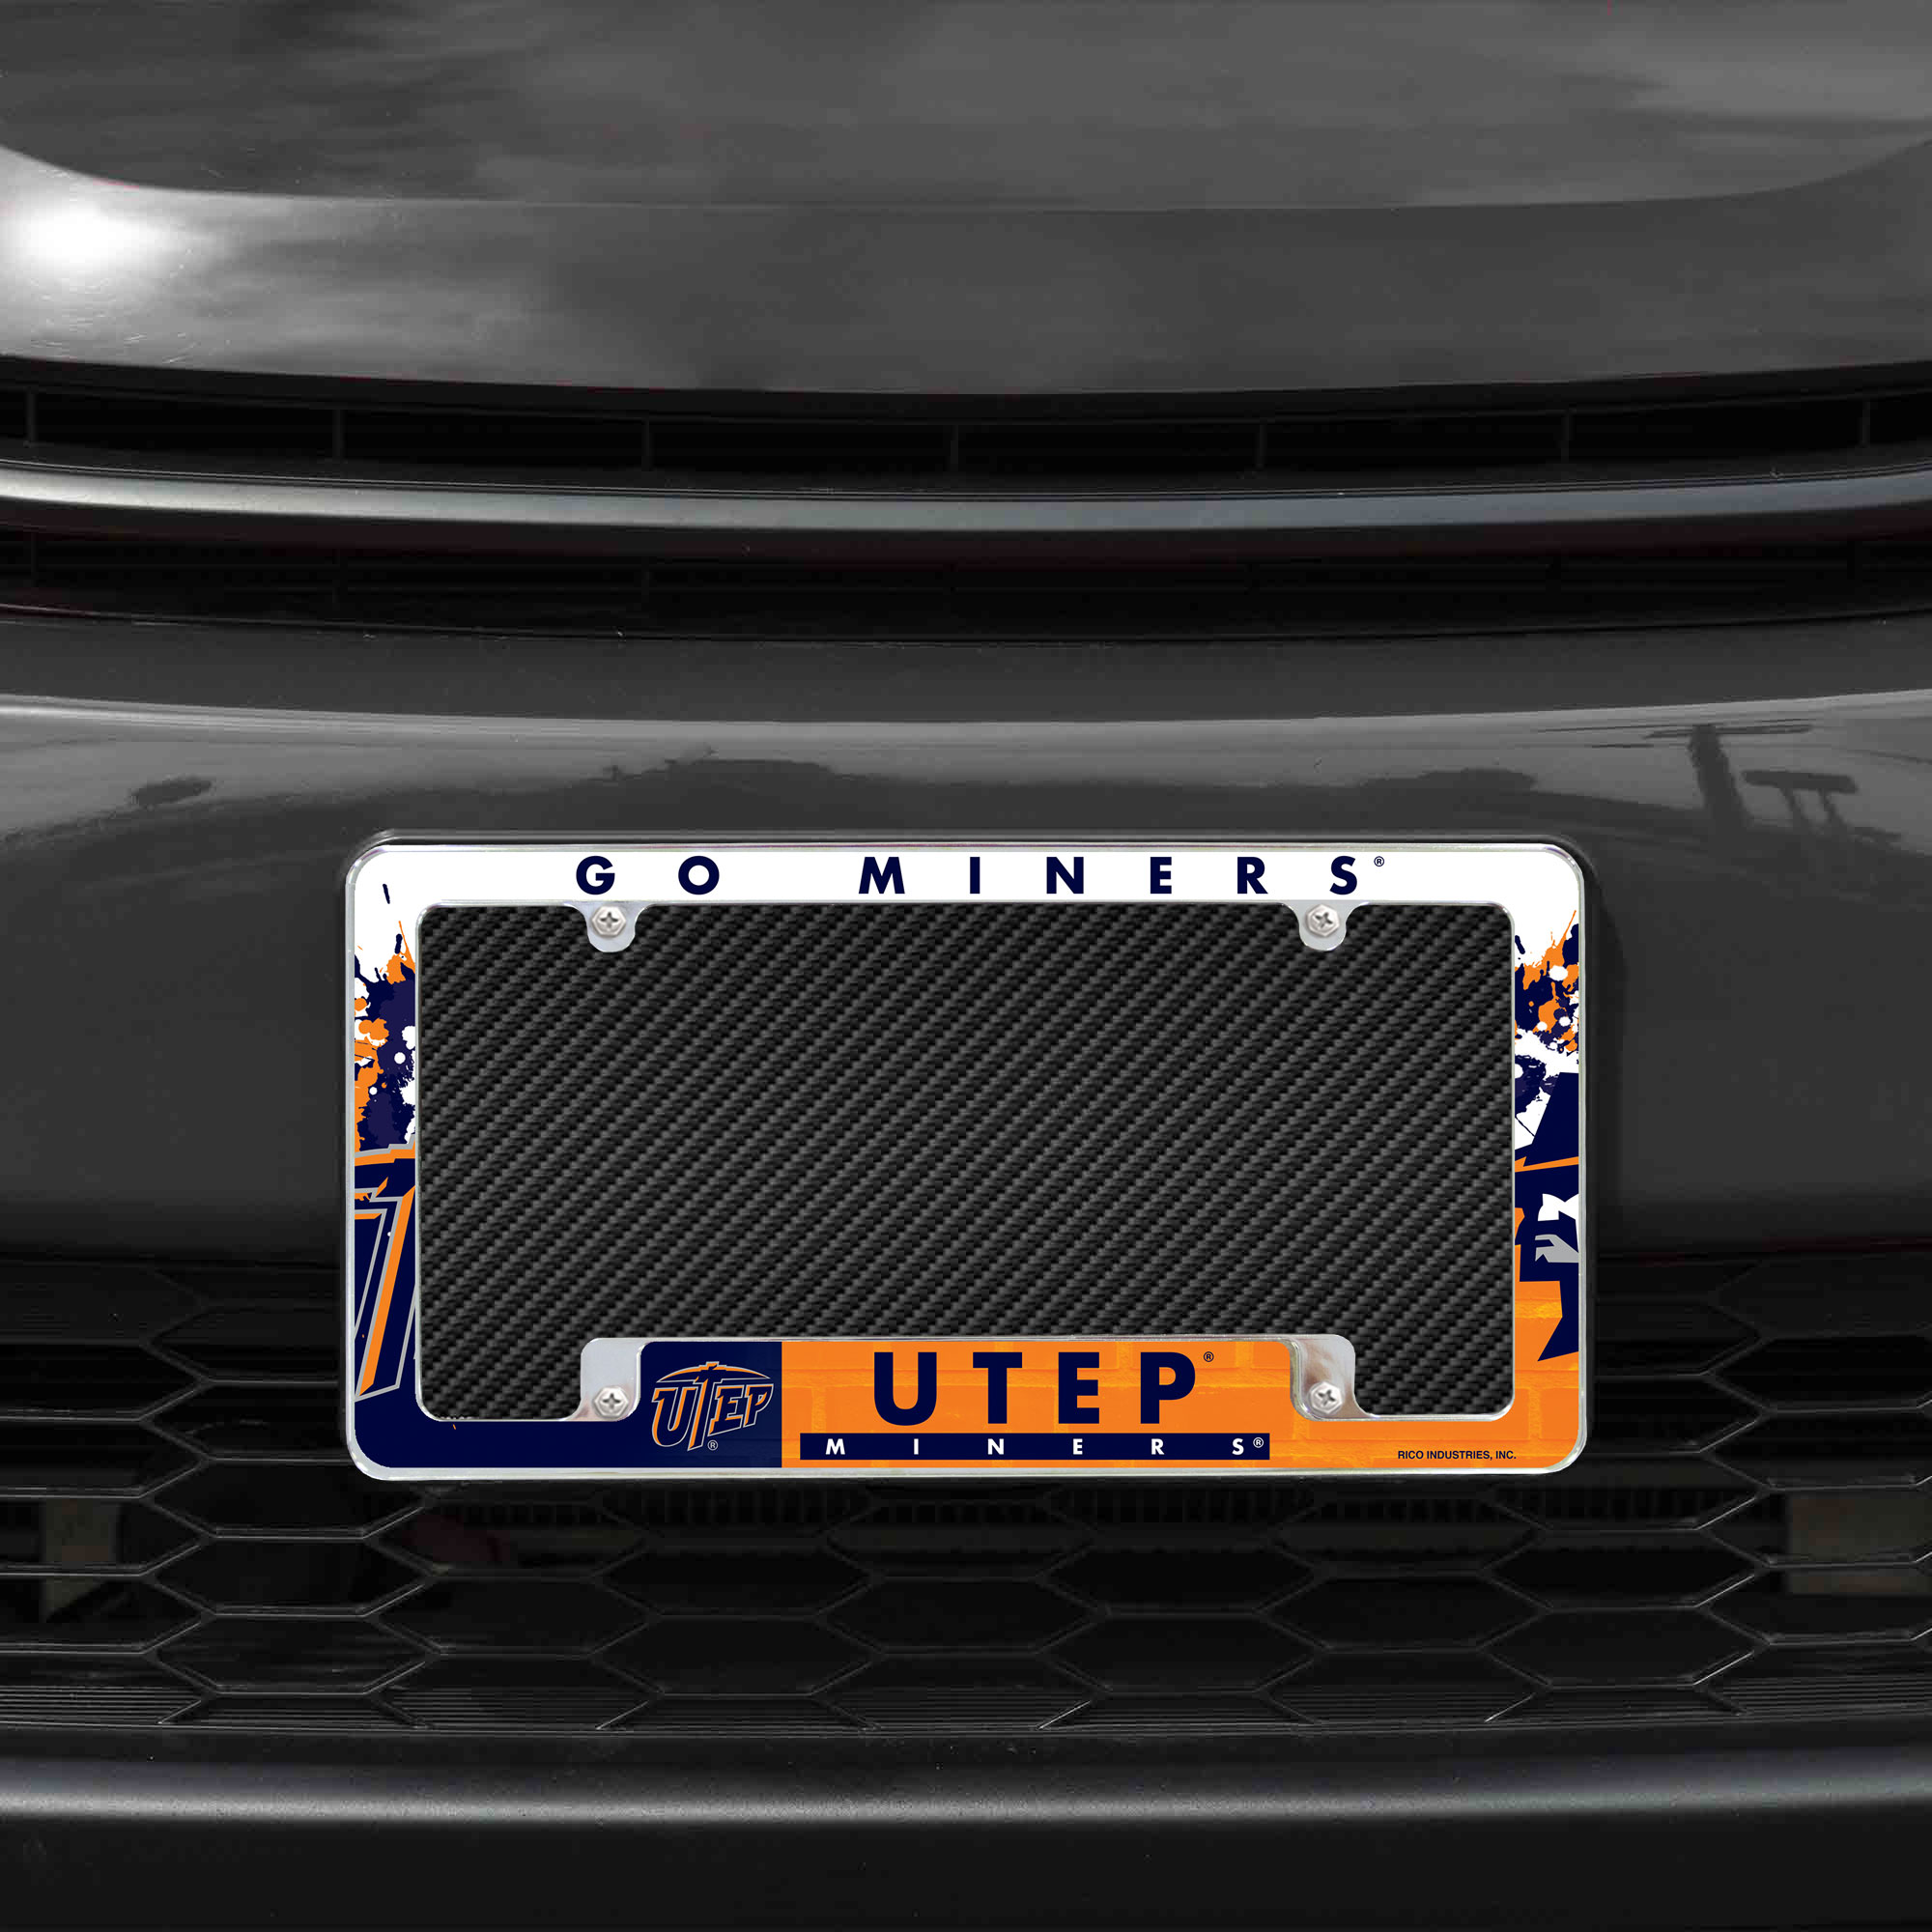 Texas El Paso NCAA Miners Chrome Metal License Plate Frame with Bold Full Frame Design - image 2 of 10